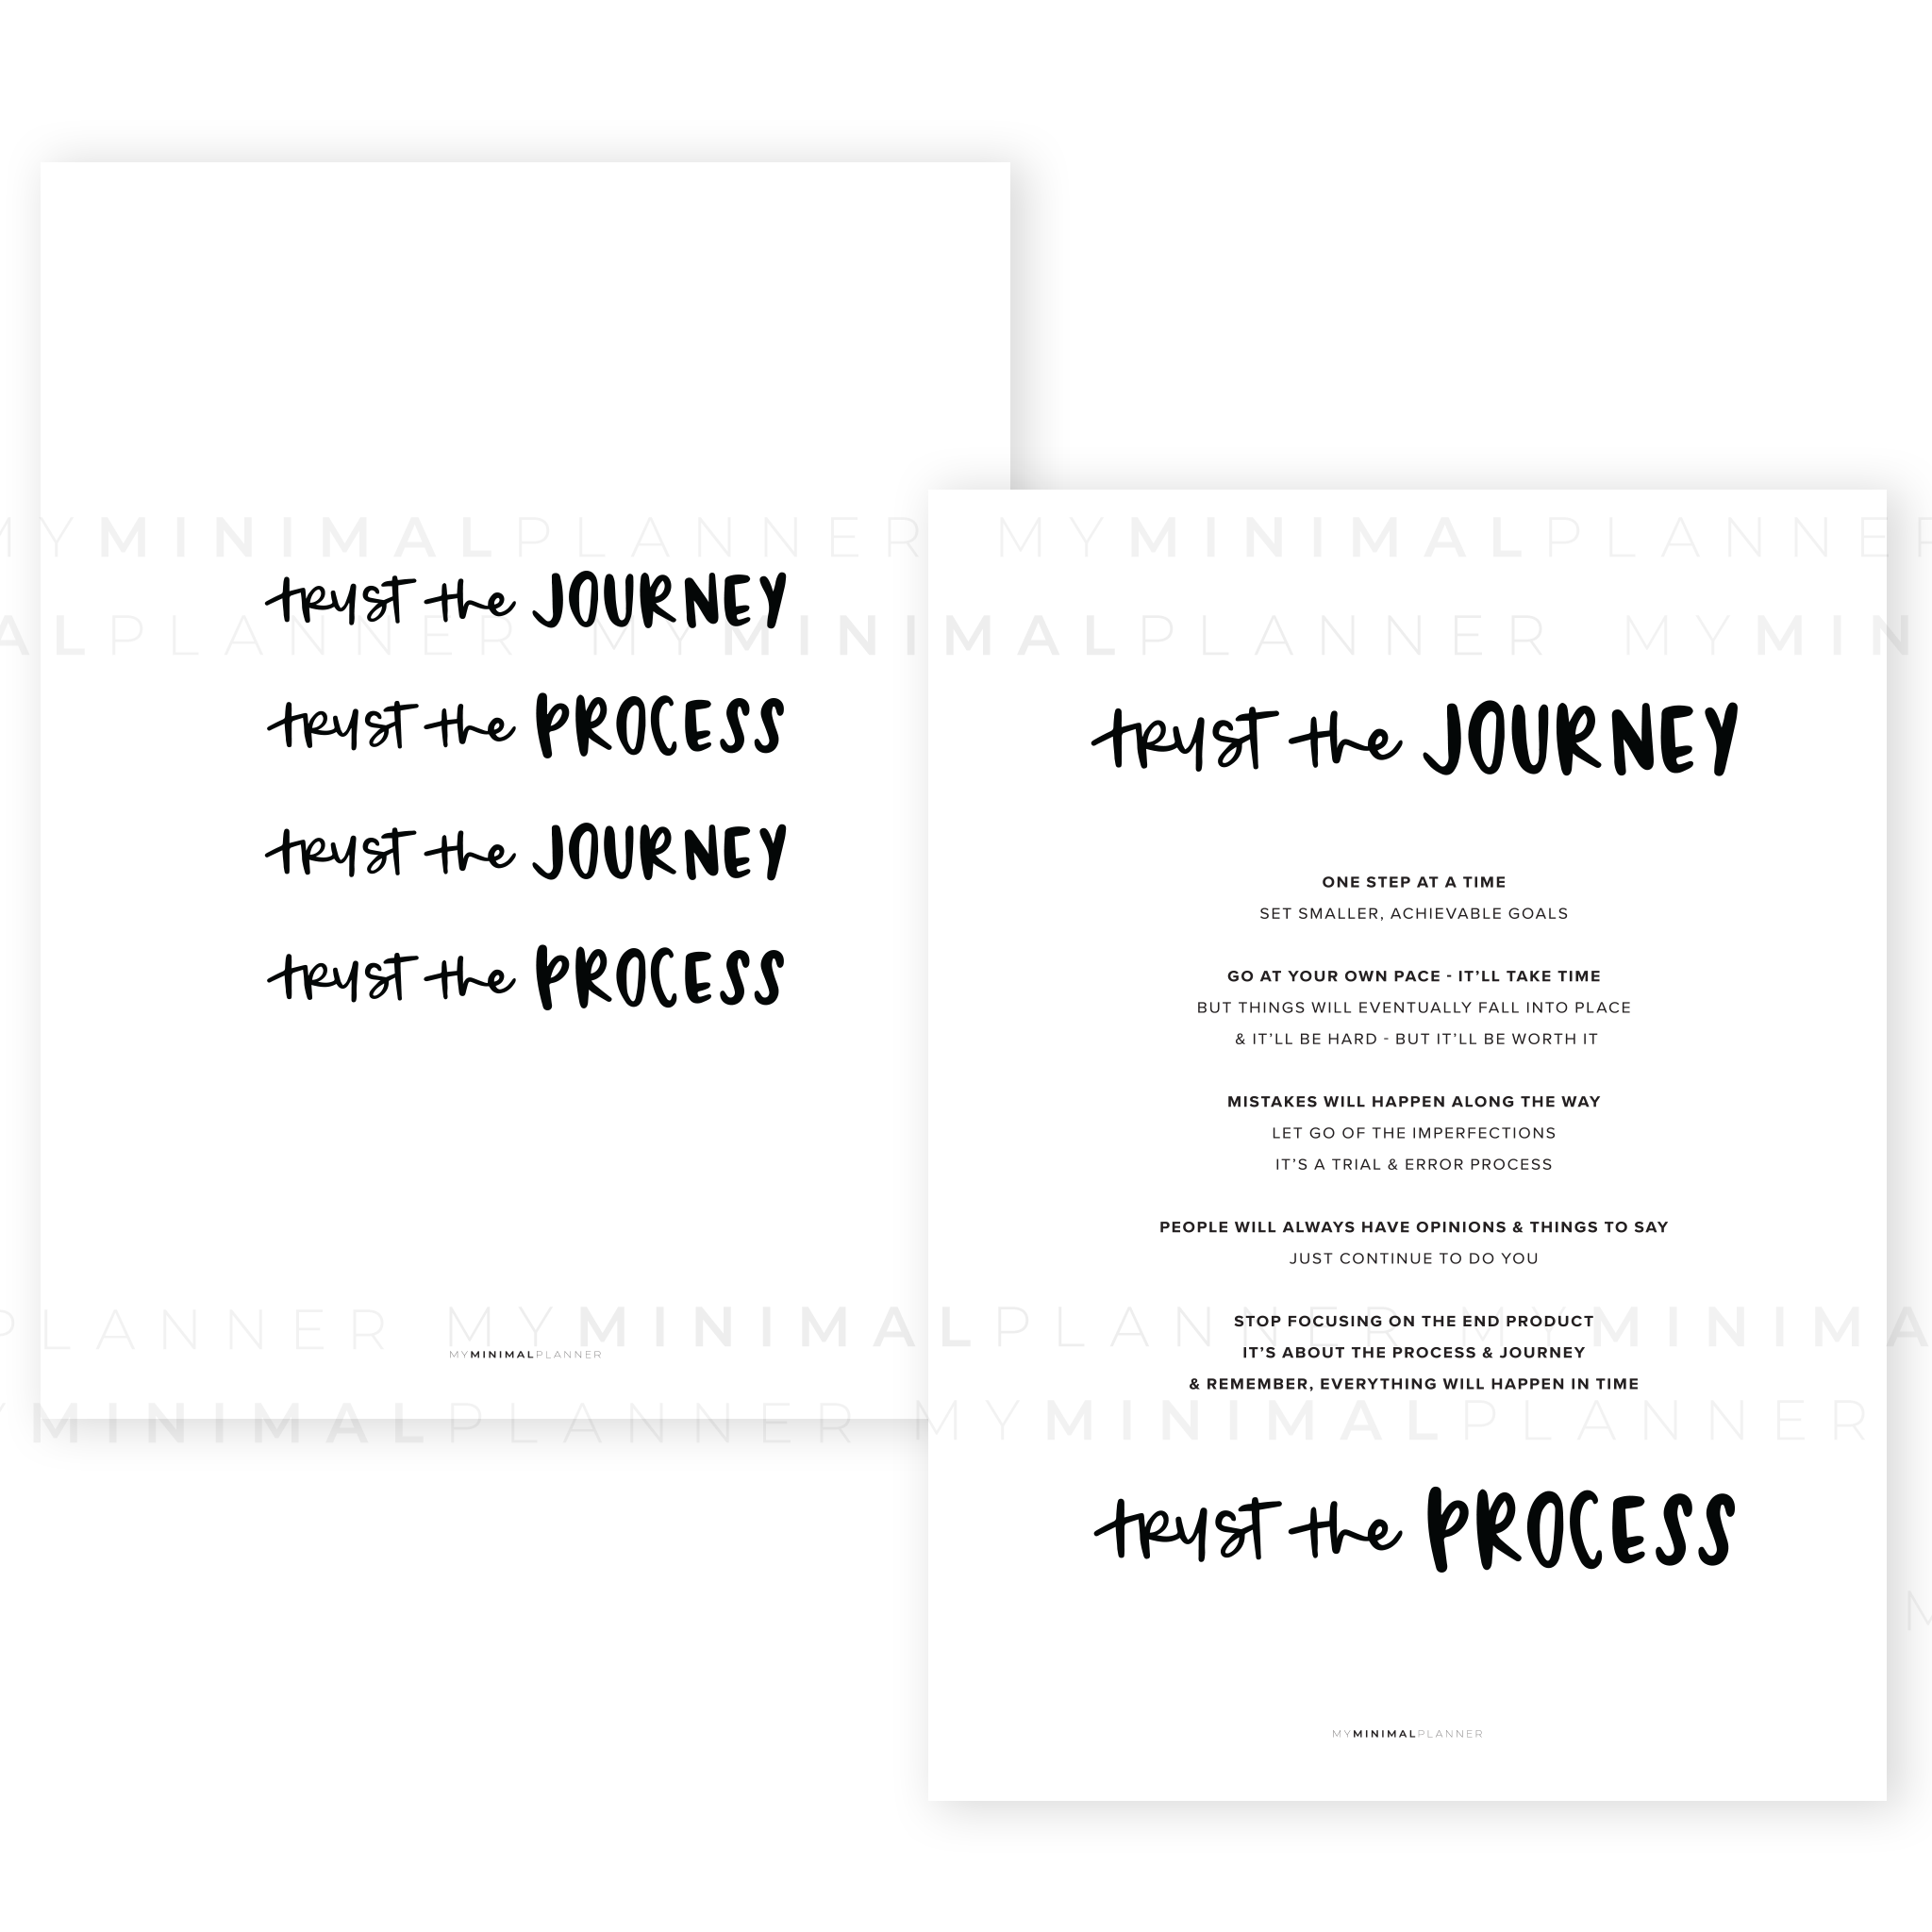 PRD106 - Trust the Journey and Process - Printable Dashboard